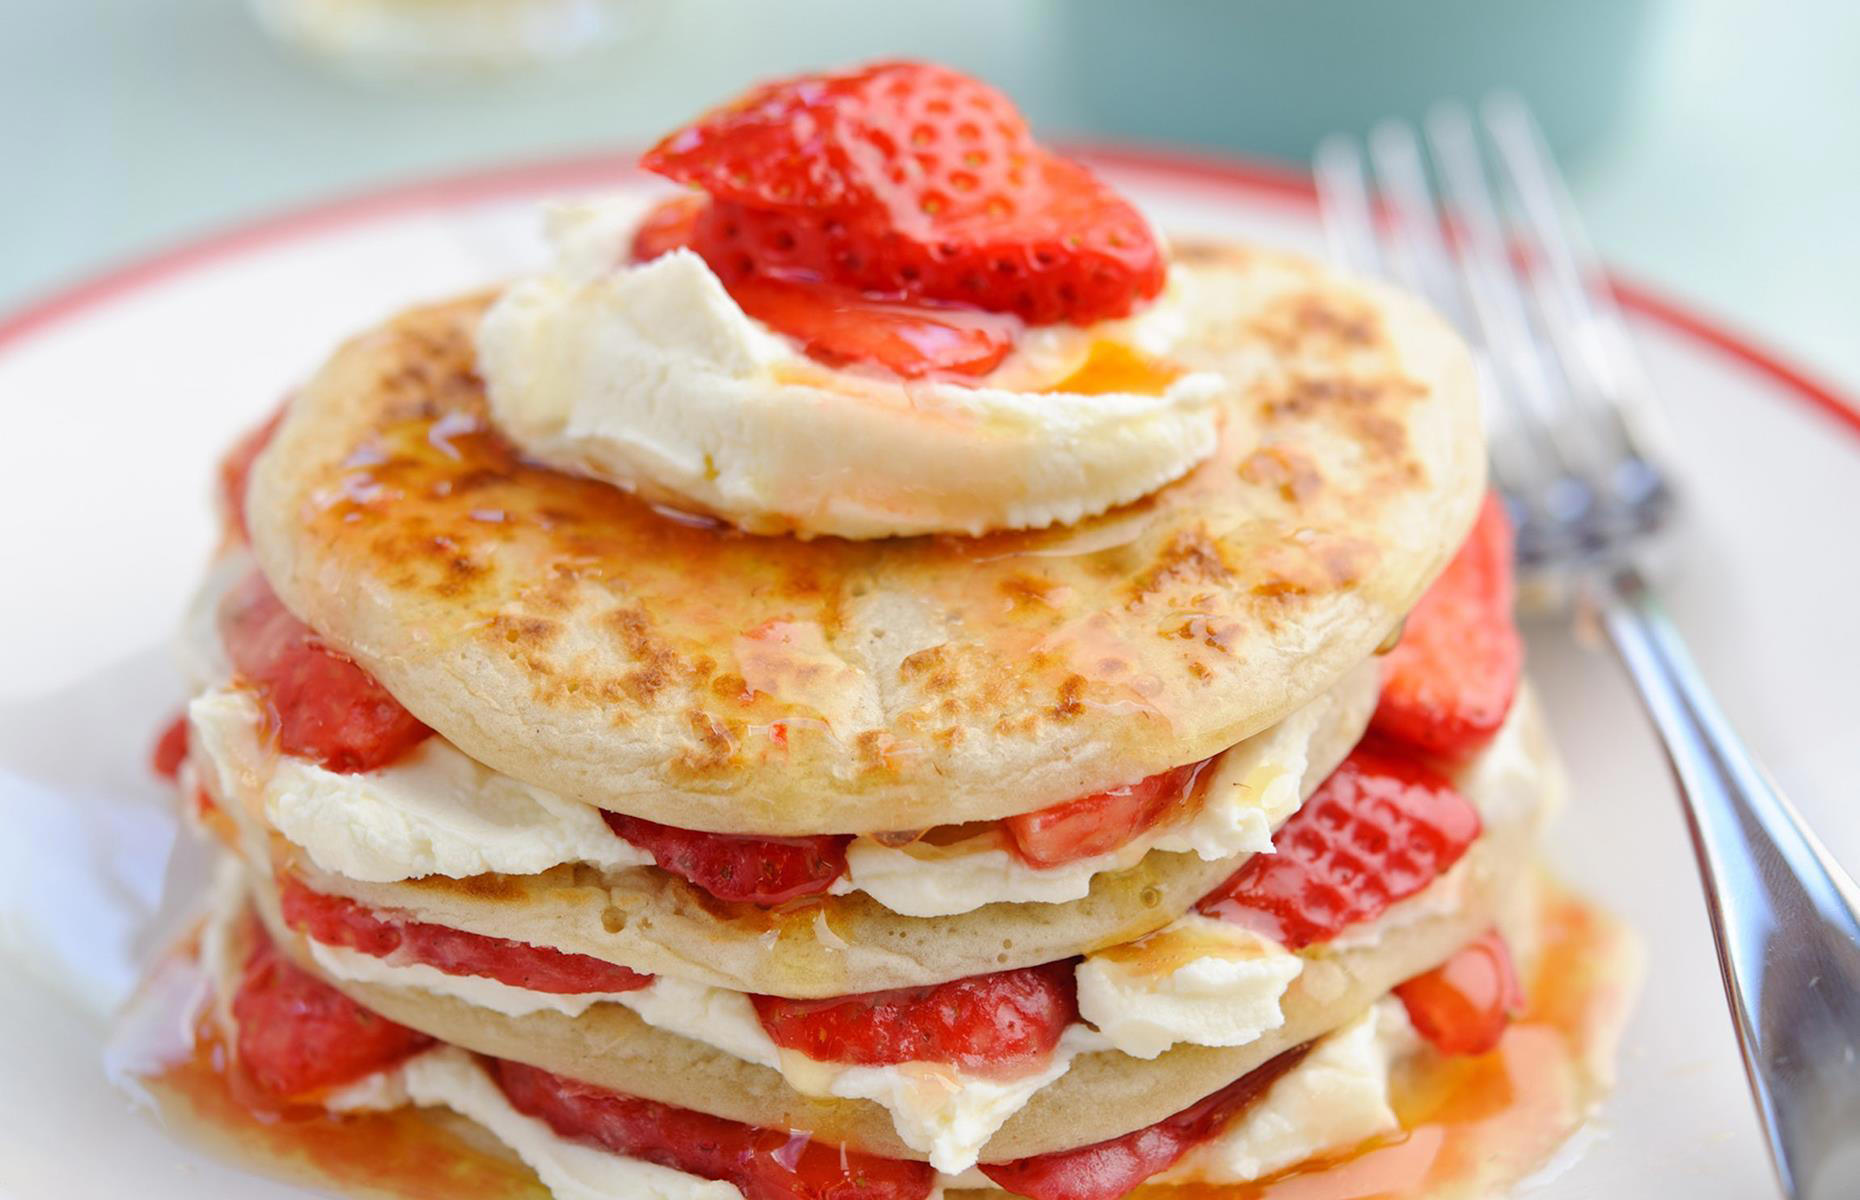 Follow these steps to make perfectly fluffy pancakes